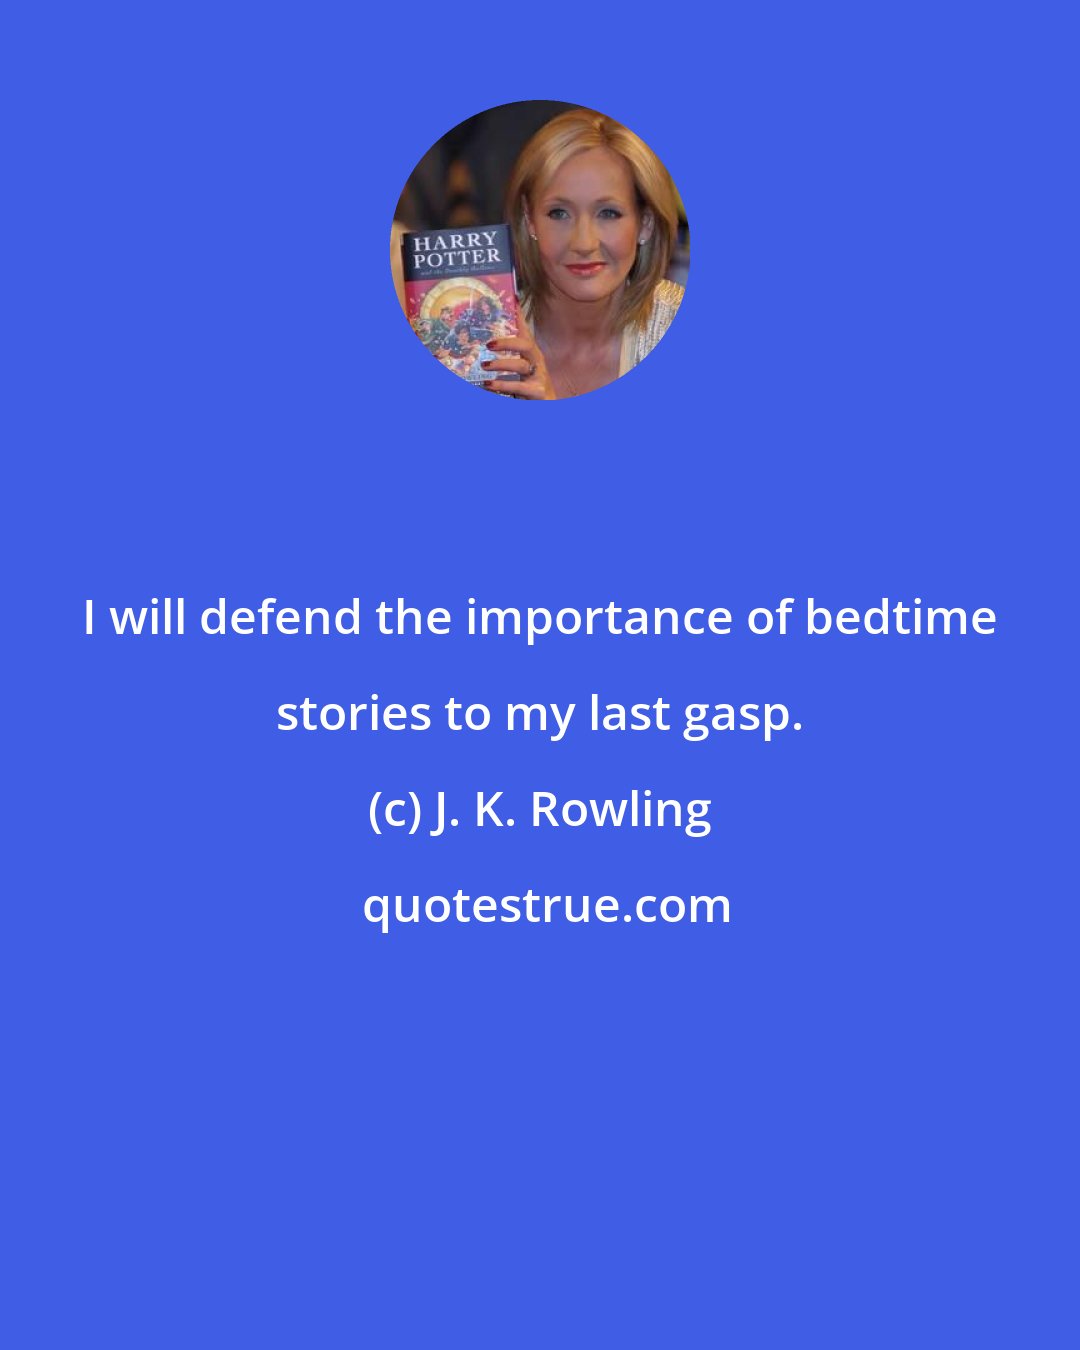 J. K. Rowling: I will defend the importance of bedtime stories to my last gasp.